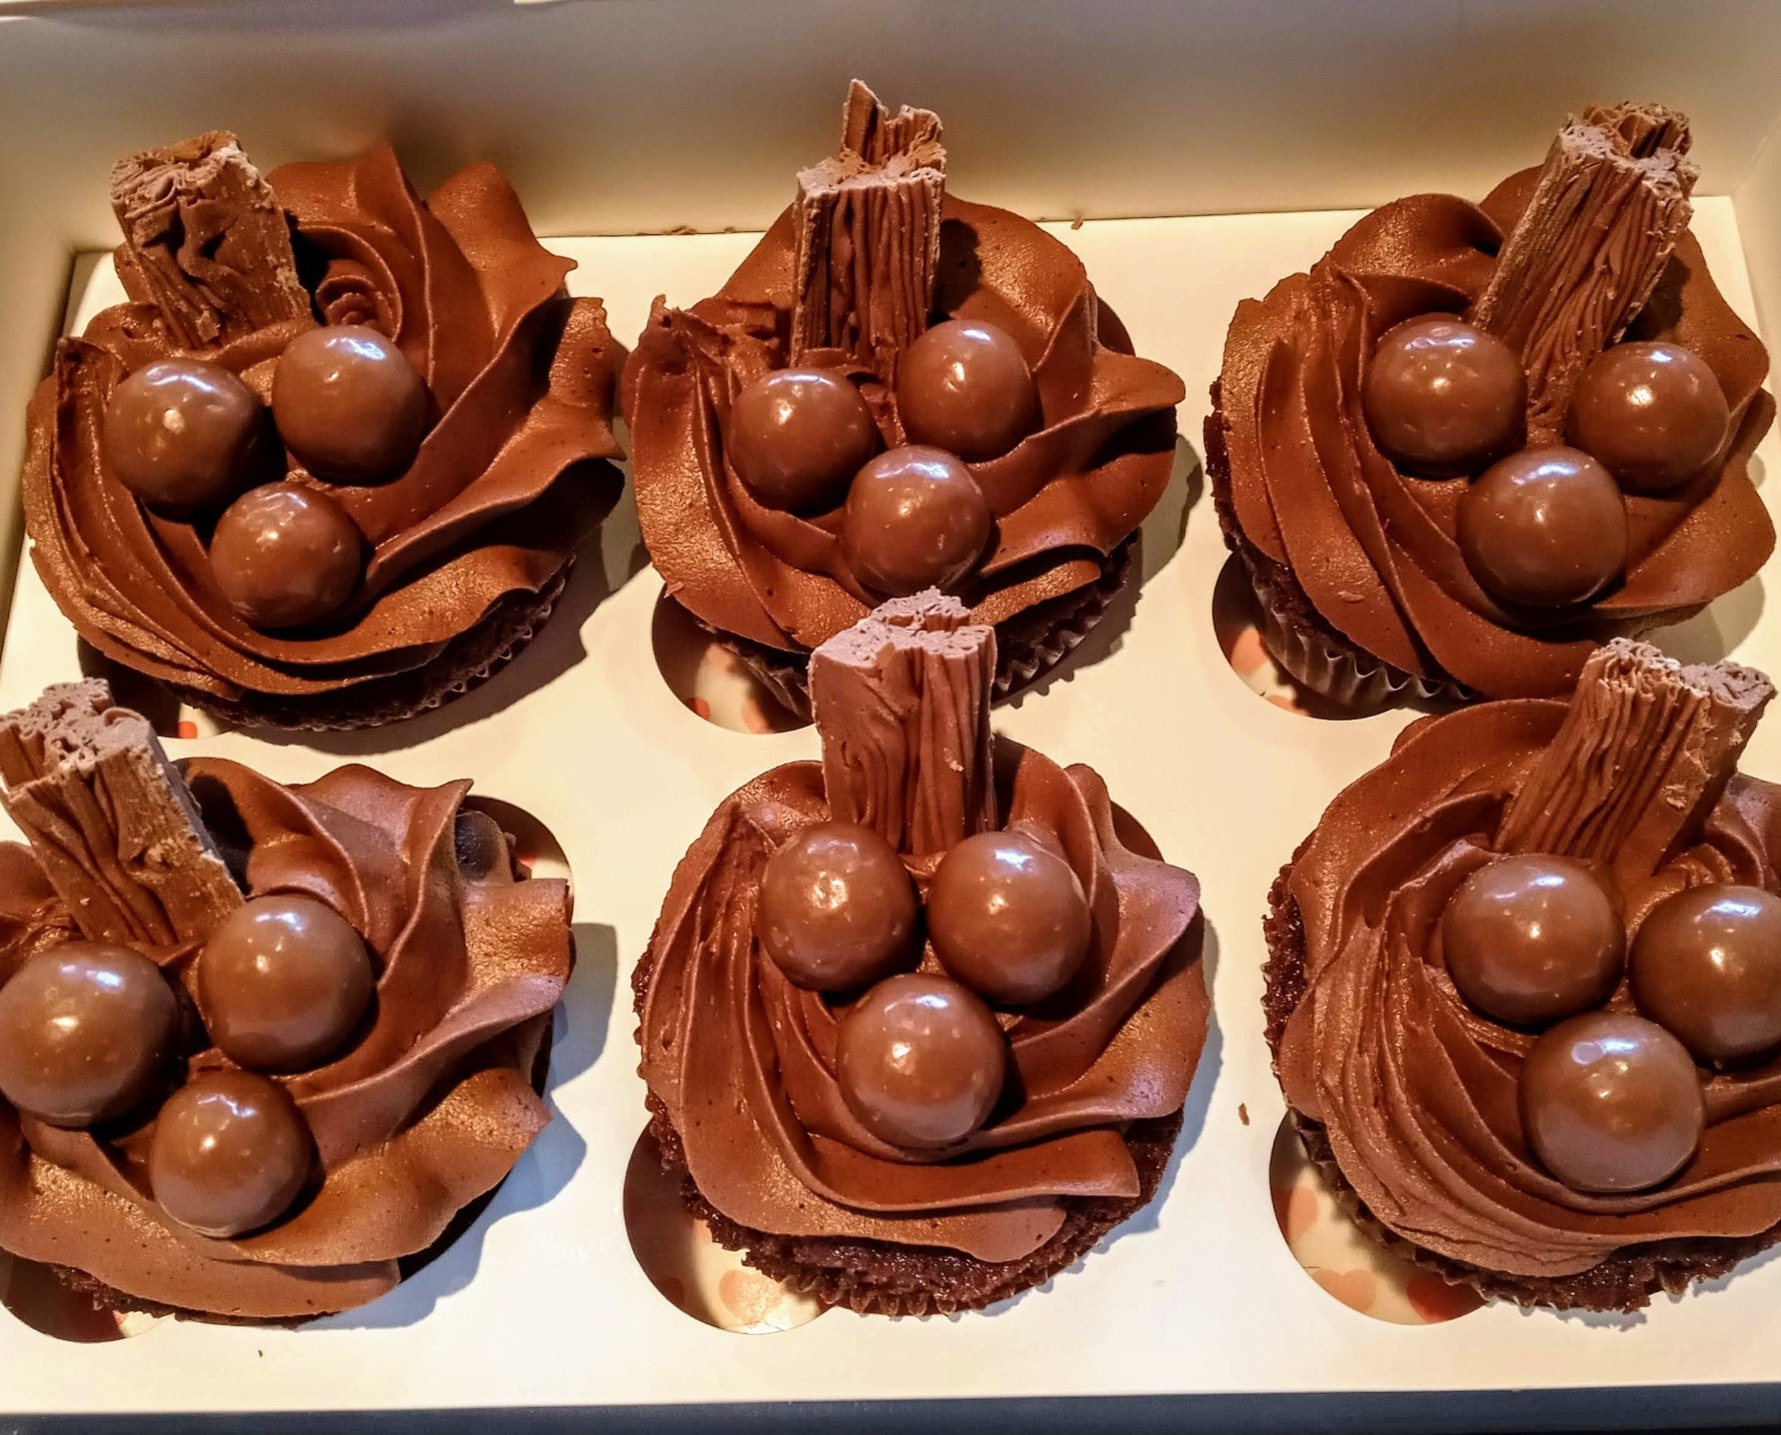 Chocolate cupcakes topped with maltesers and a flake